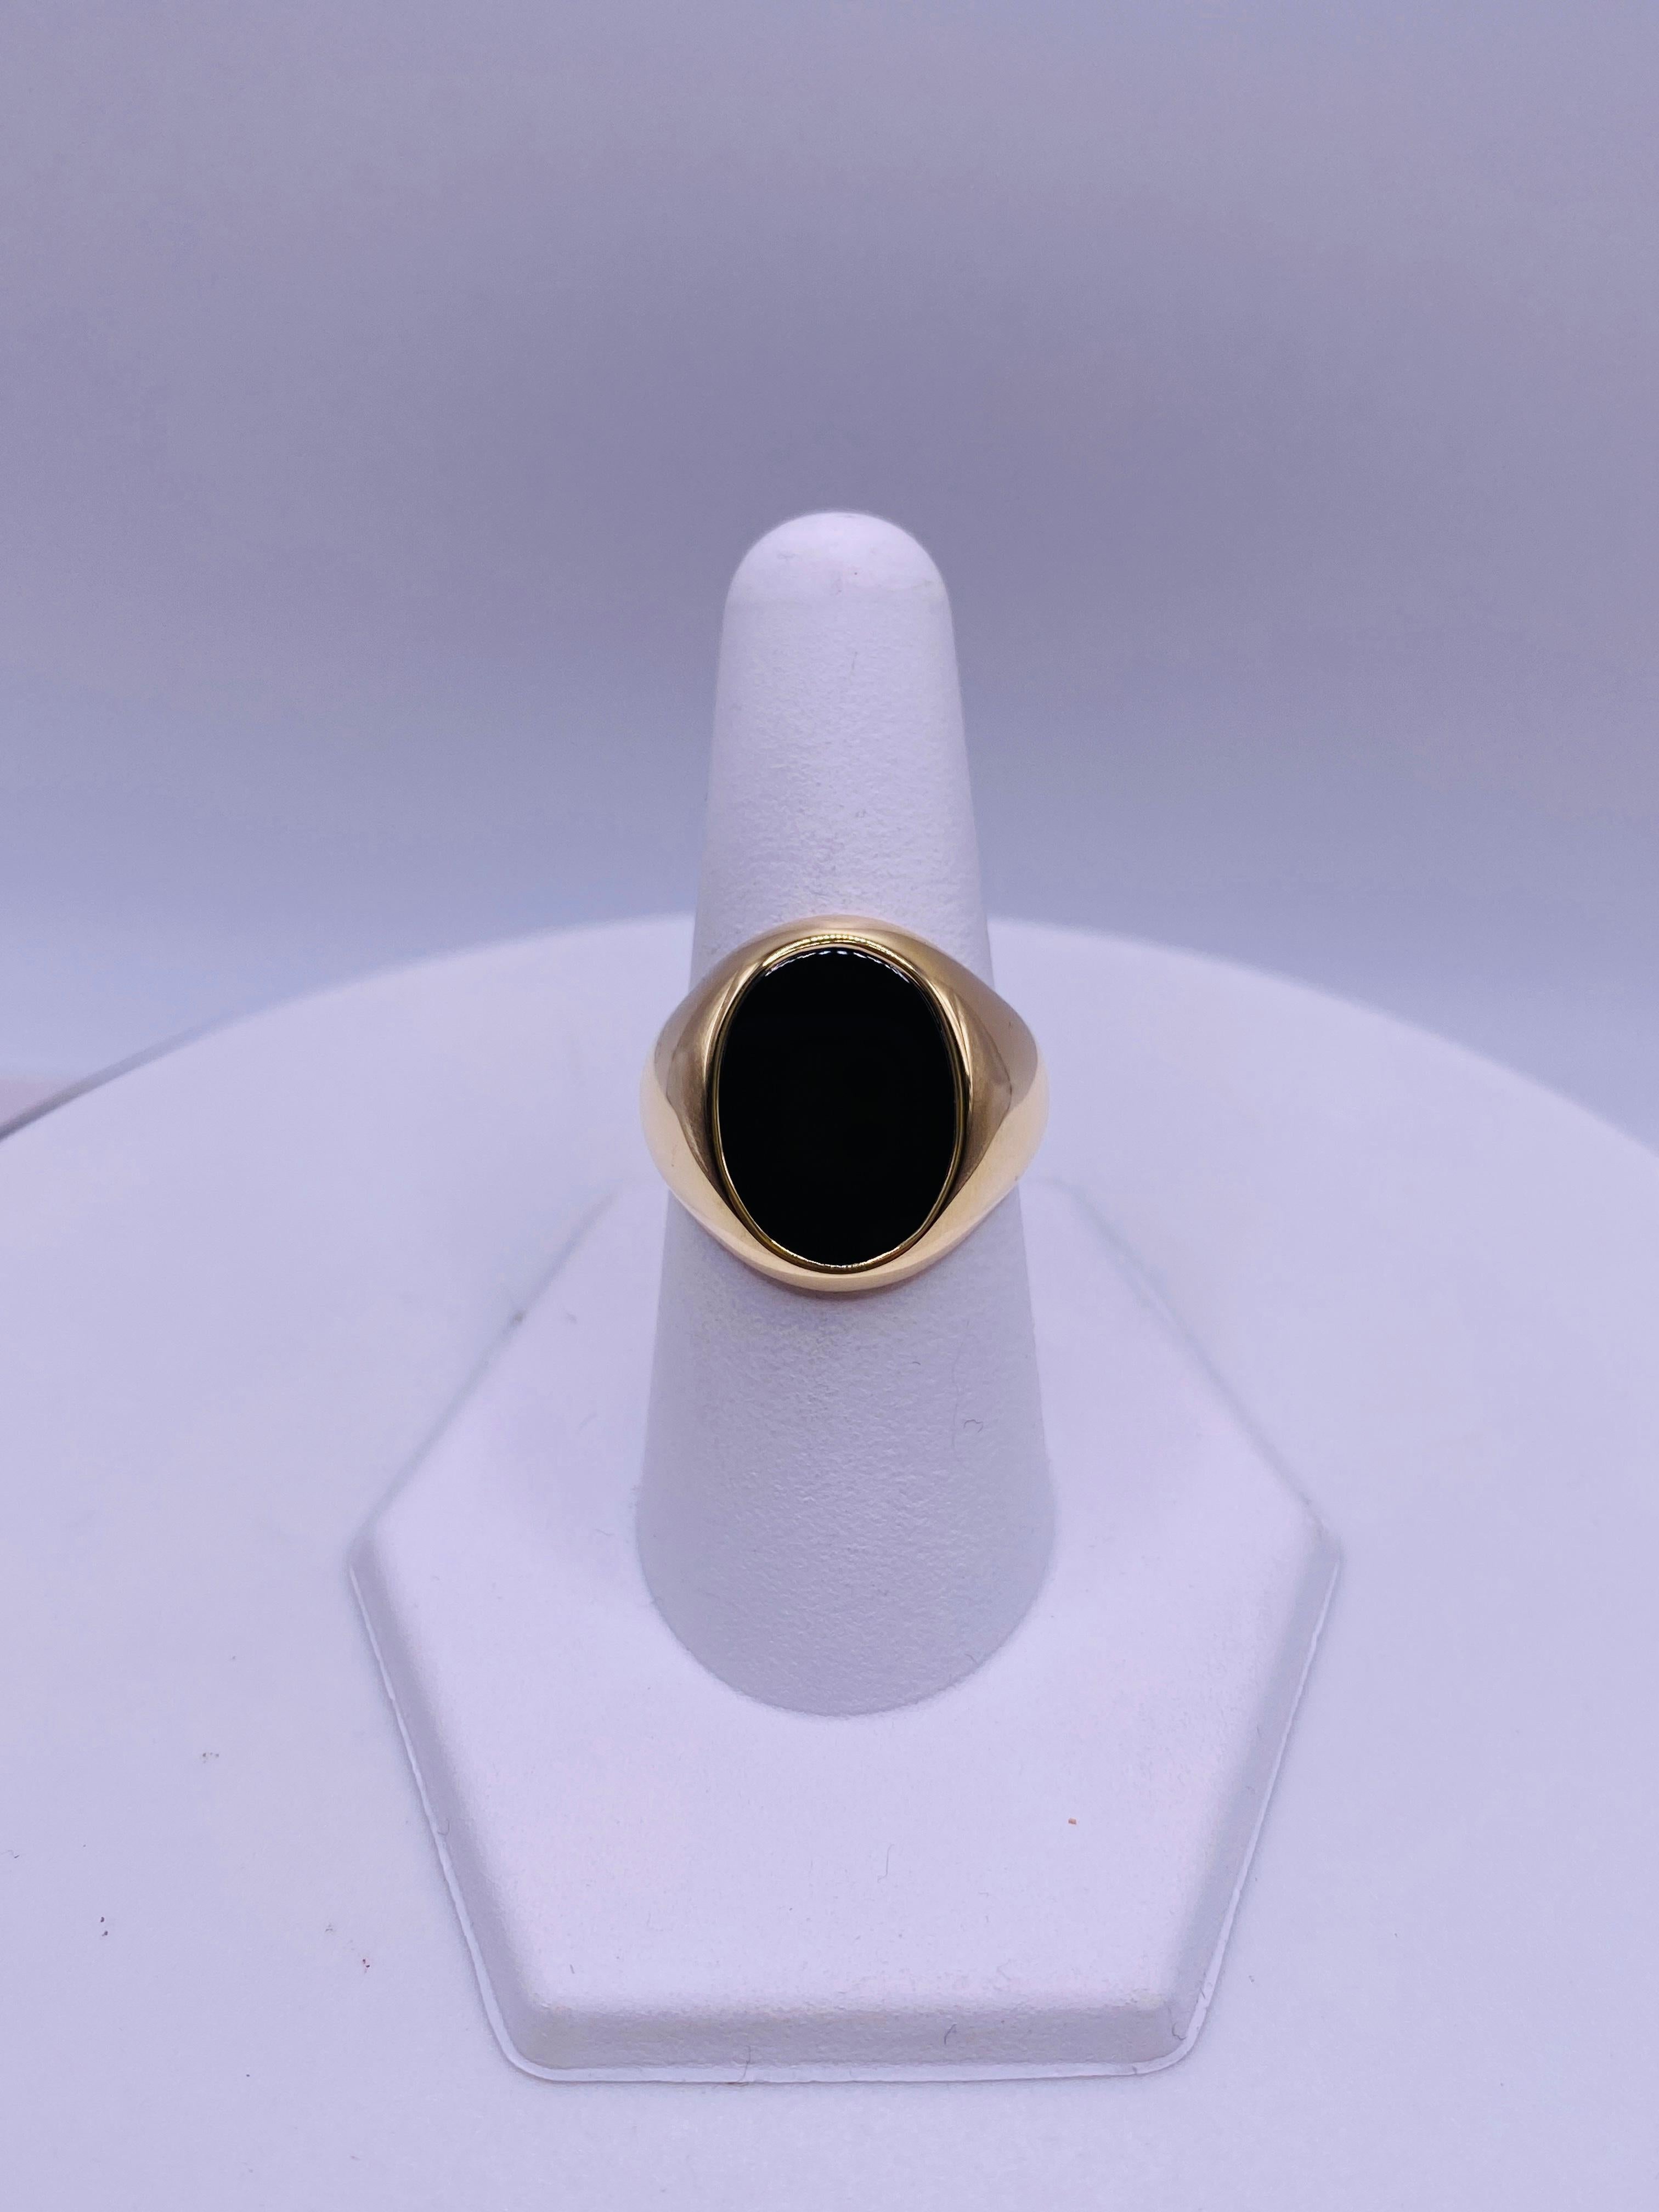 Tiffany & Co Onyx 18k Yellow Gold Signet Ring. Marked Tiffany & Co and AU750. Size 9 US. 10.1Dwt